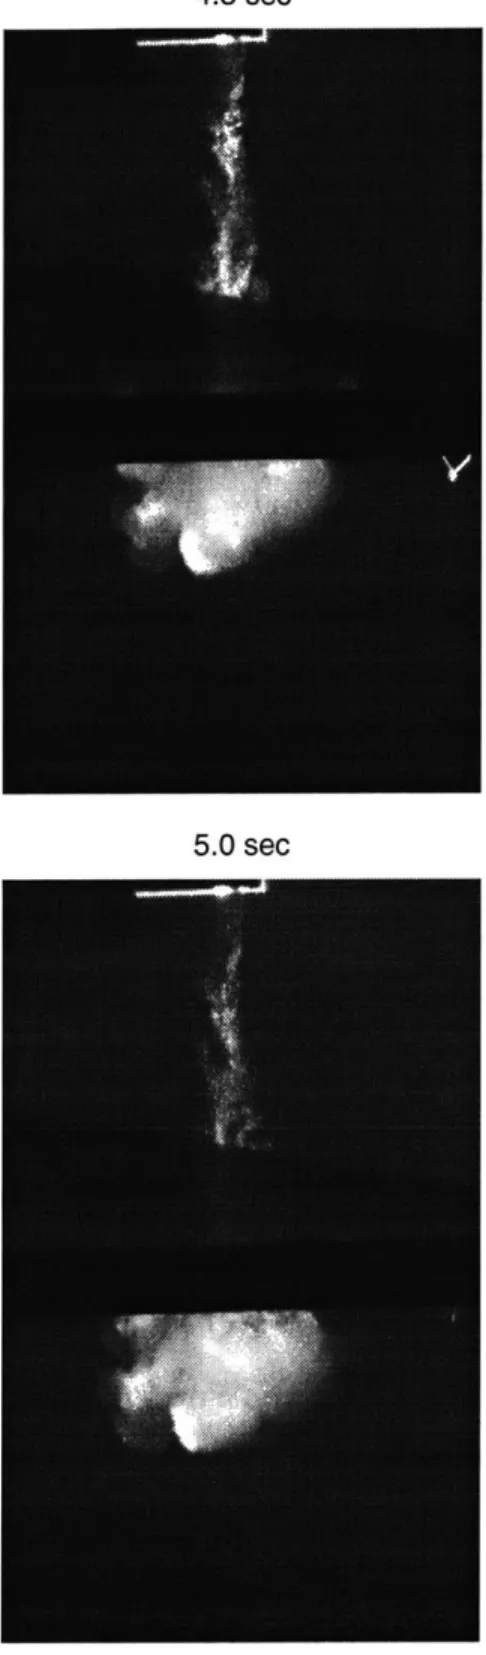 Figure  5-1:  Before  and  after  images  of  0.264  mm  particle  cloud  descending  through sediment  trap.